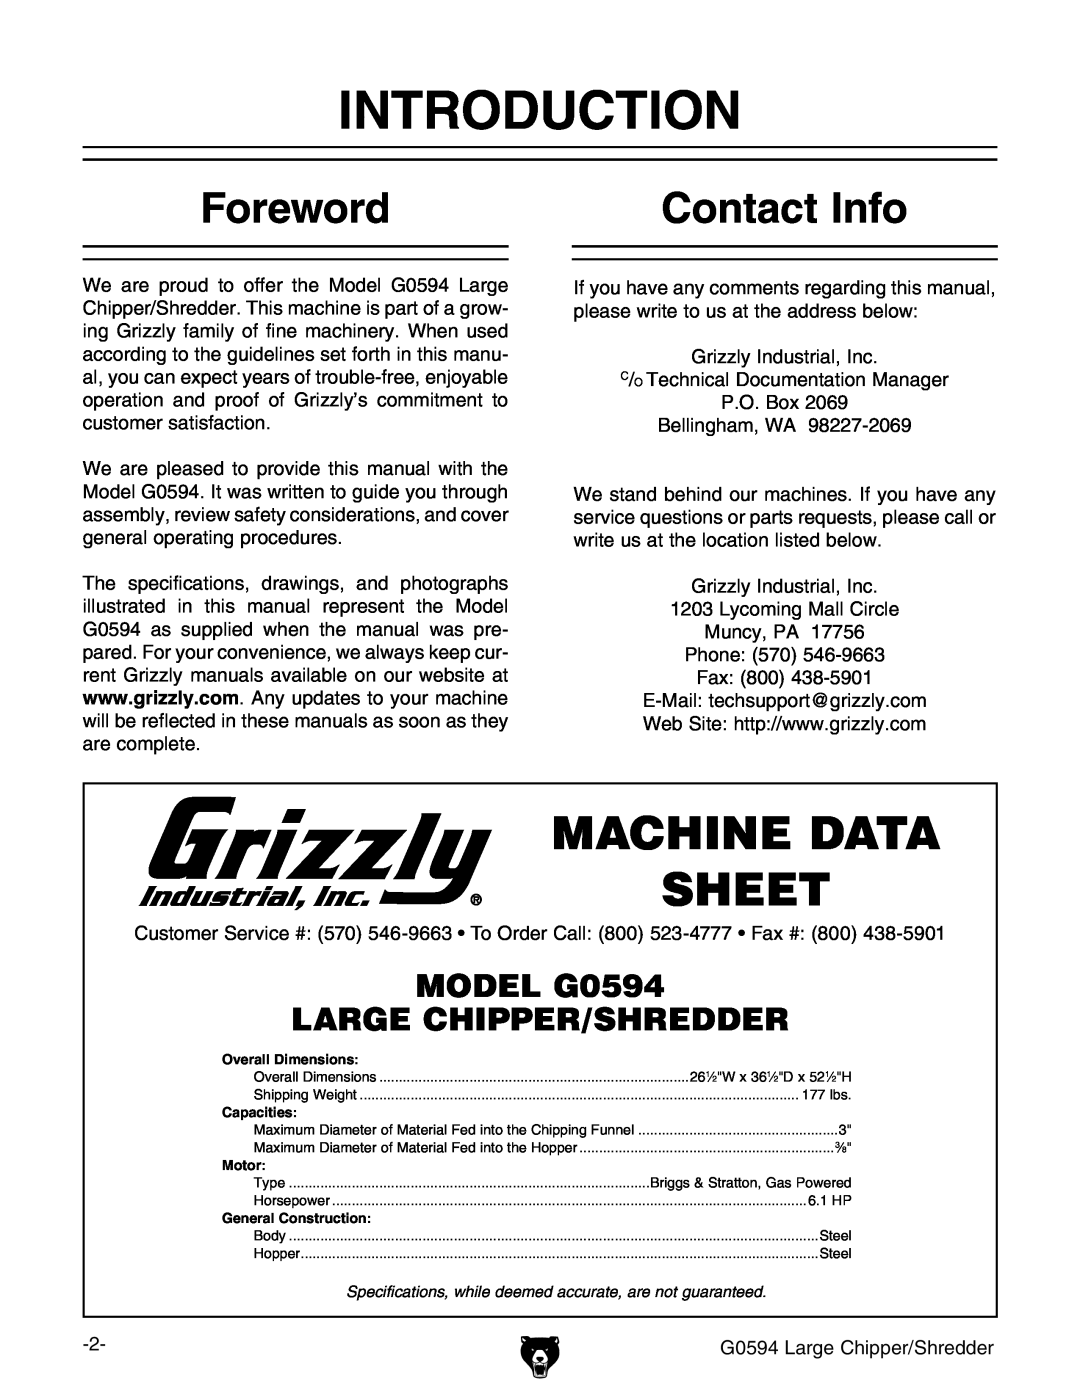 Grizzly owner manual Introduction, Foreword, Contact Info, Machine Data Sheet, MODEL G0594 LARGE CHIPPER/SHREDDER 